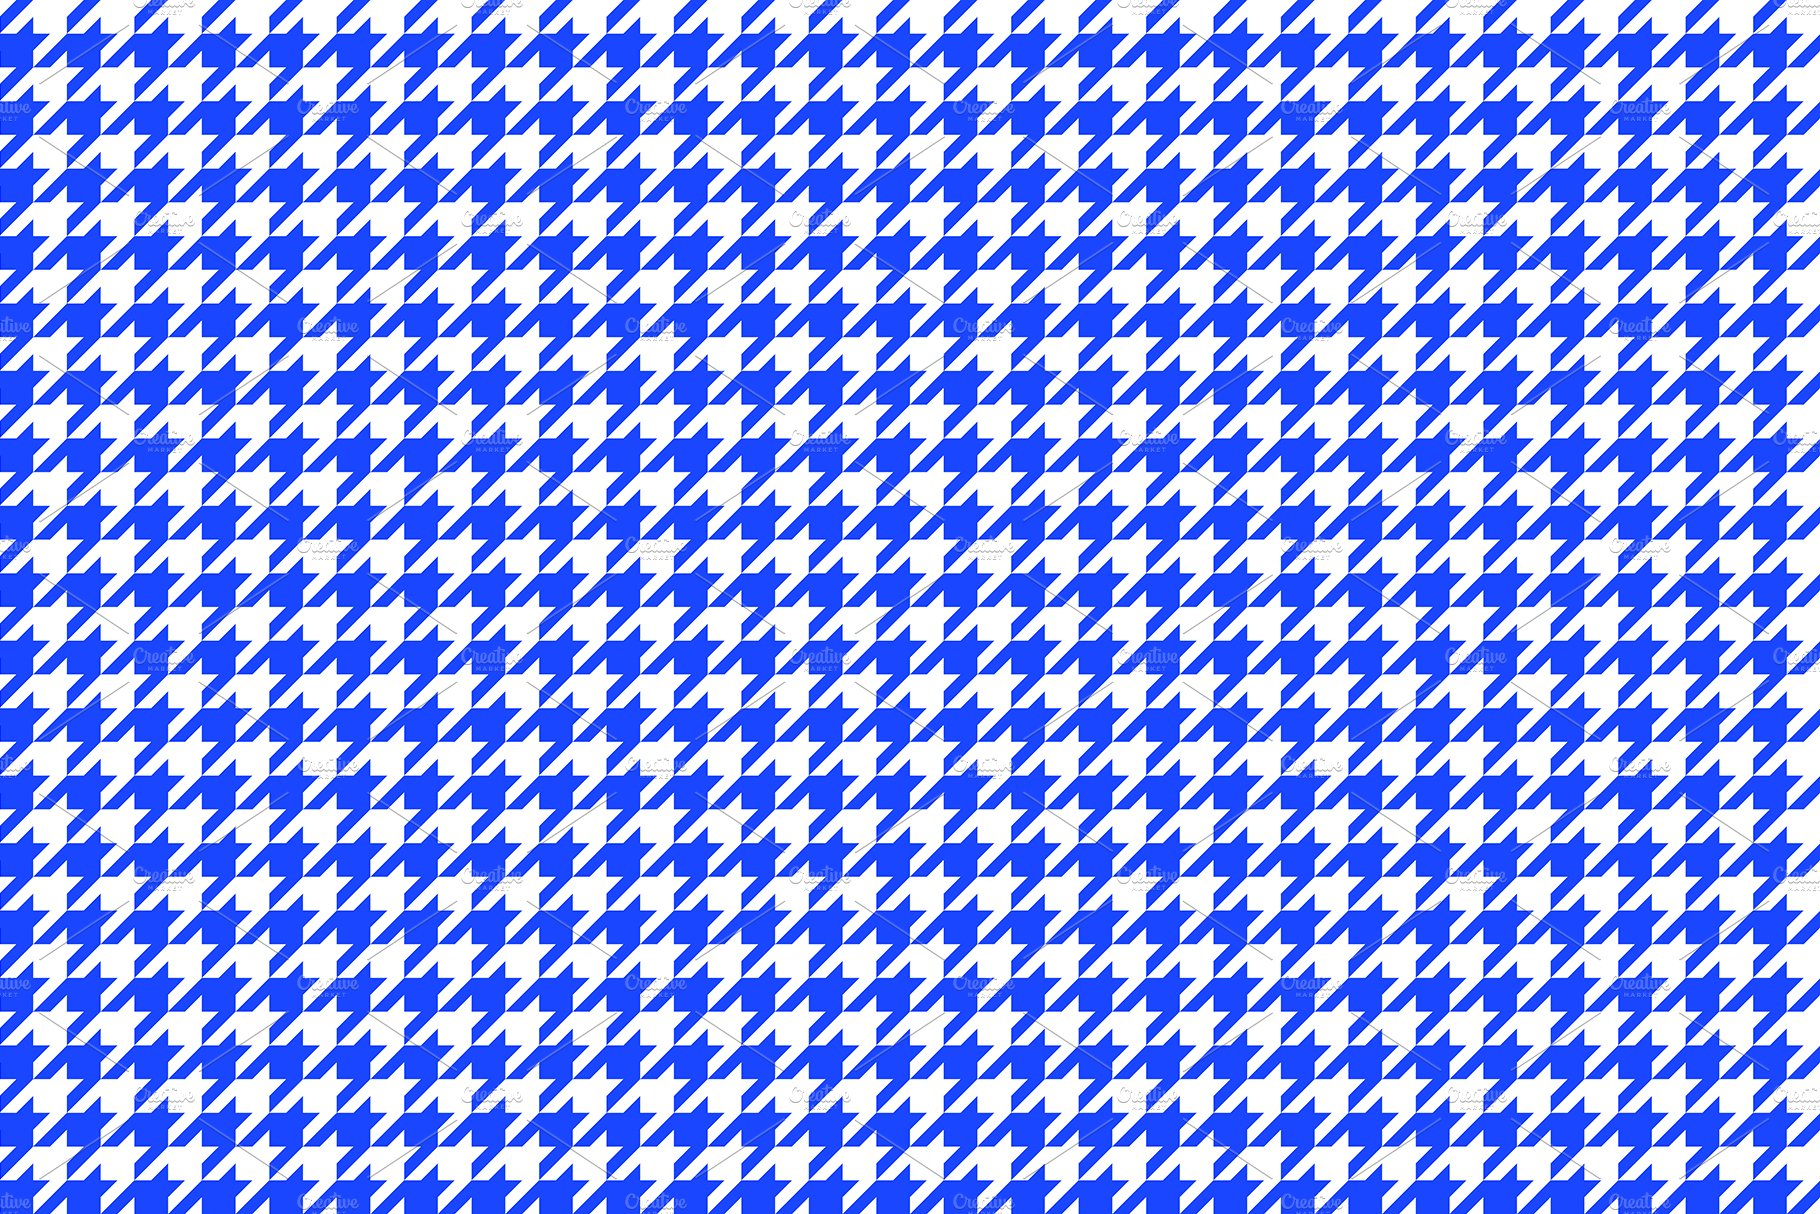 20 Houndstooth Pattern Textures ~